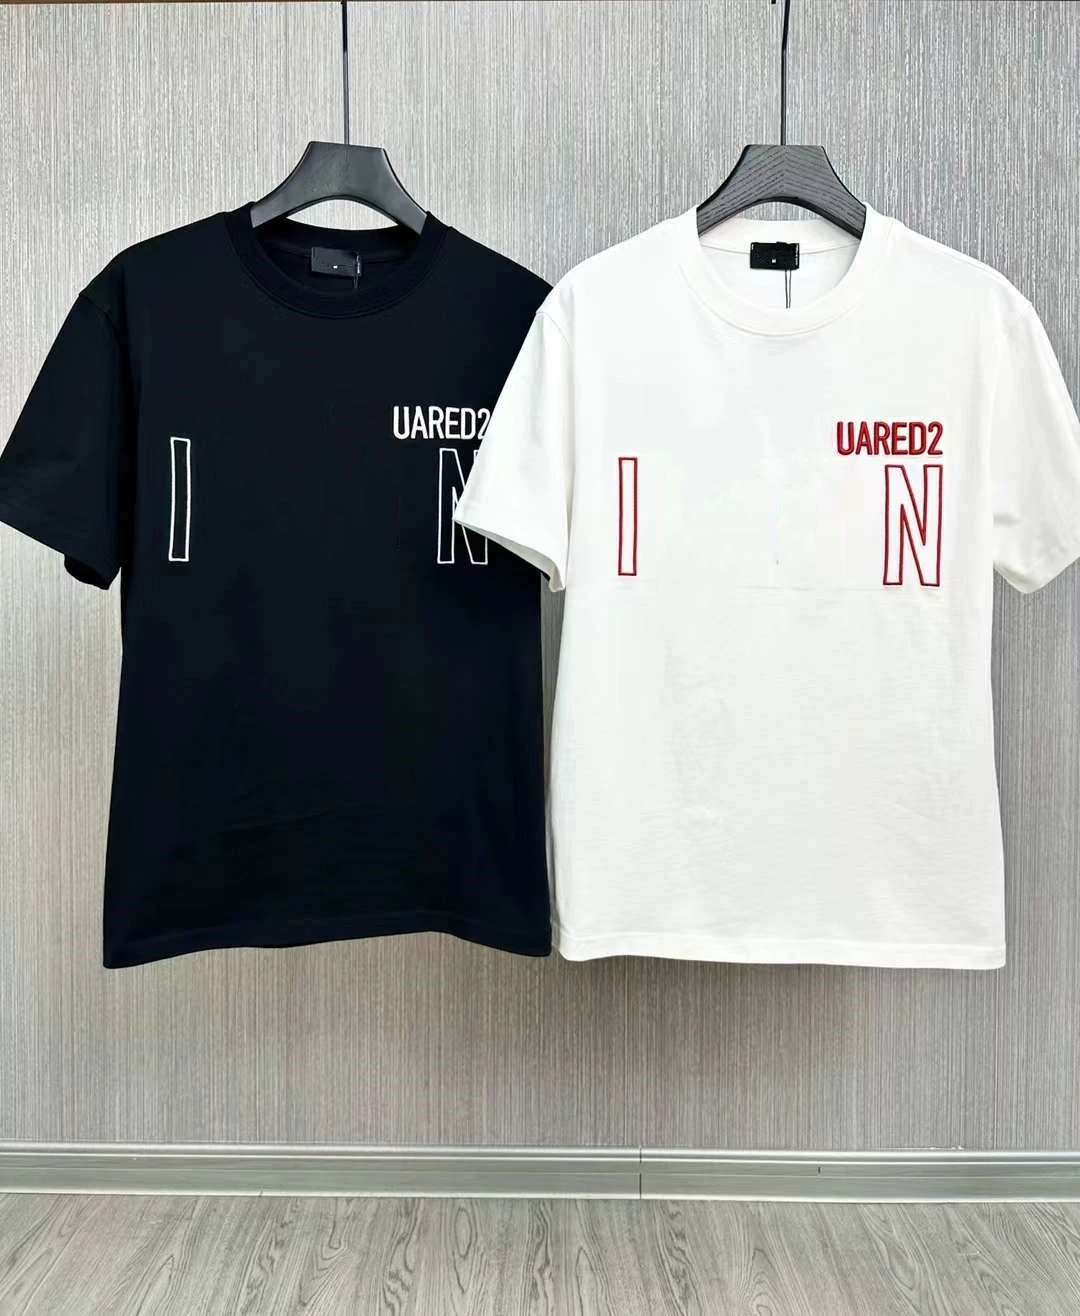 

2023 New Women/Men's Embroidery Letter Print Oversized T Shirt Stylish Cotton Summer Top T Shirts Couple Outfit D2829#